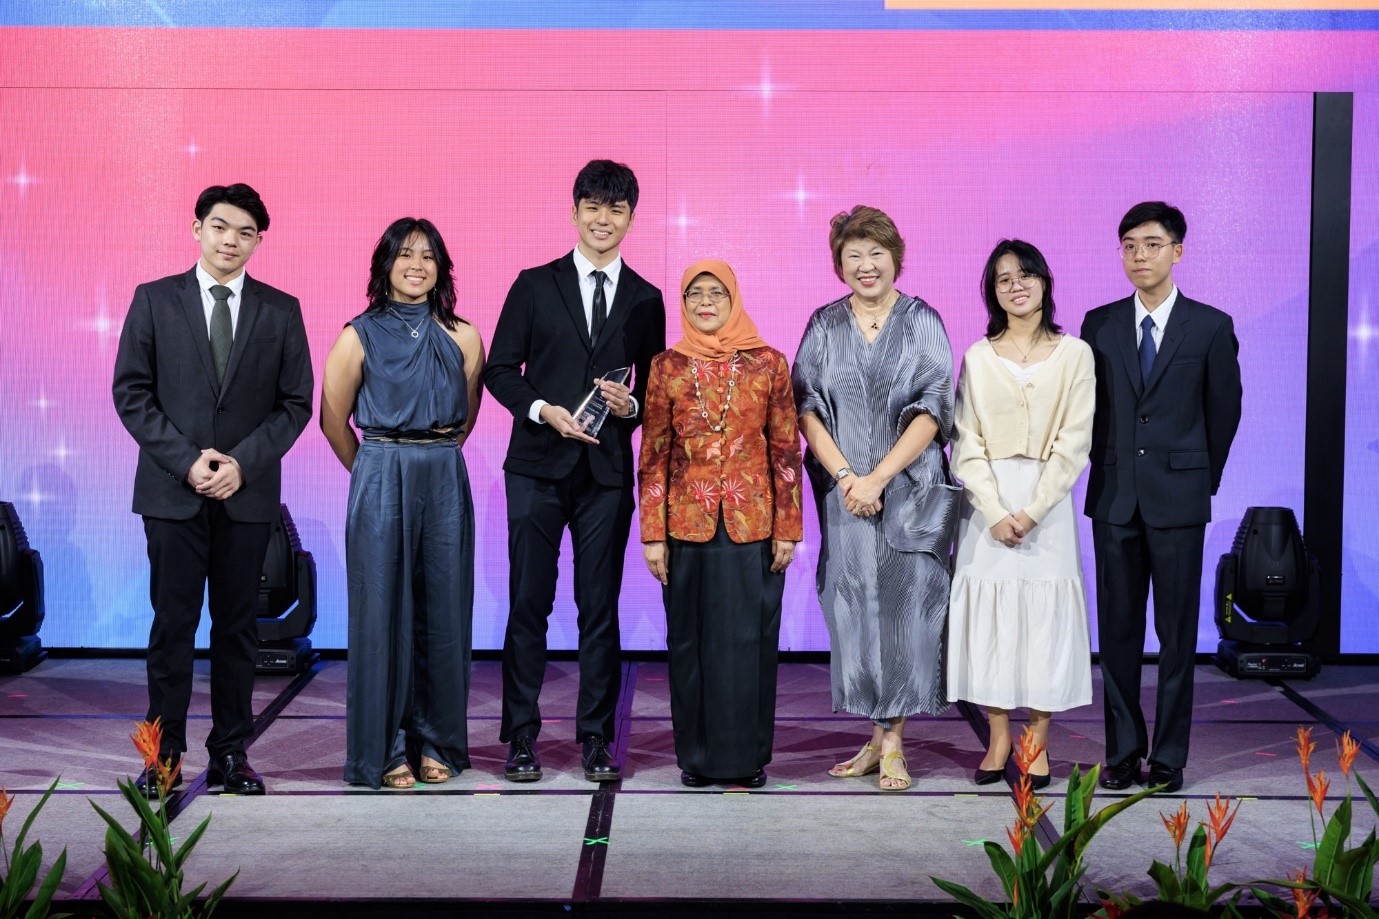 Benoit Chia (holding trophy) and his team receiving an award from Singapore President Halimah Yacob.